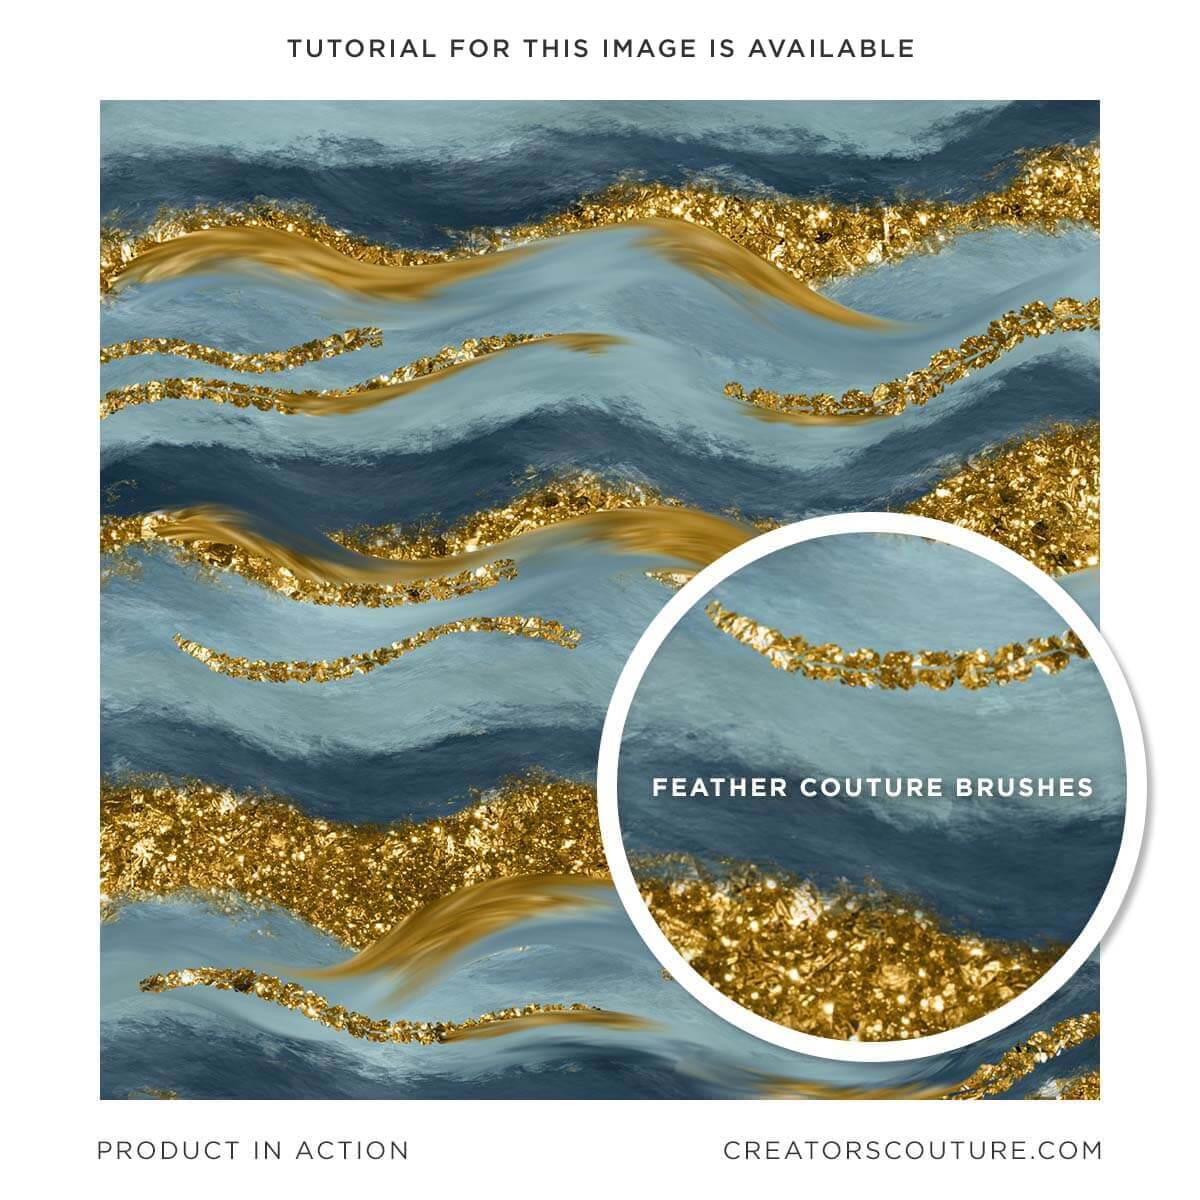 abstract blue wave illustration with gold accents, close up of feather inspired photoshop brush strokes